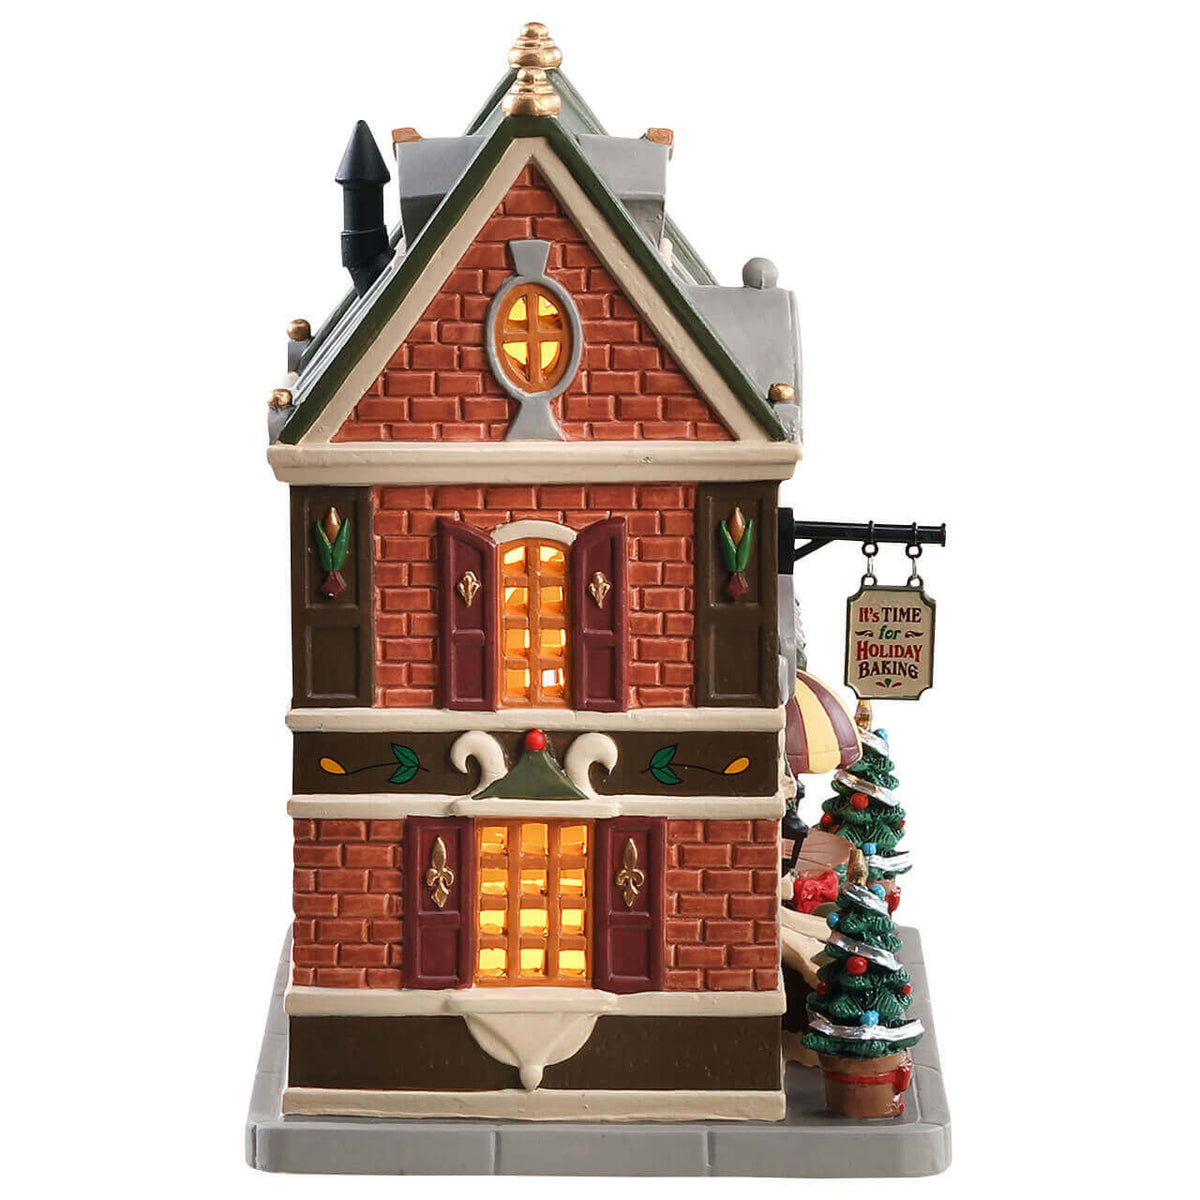 LEMAX Sara's Spice Shop #85370 – House of Holiday